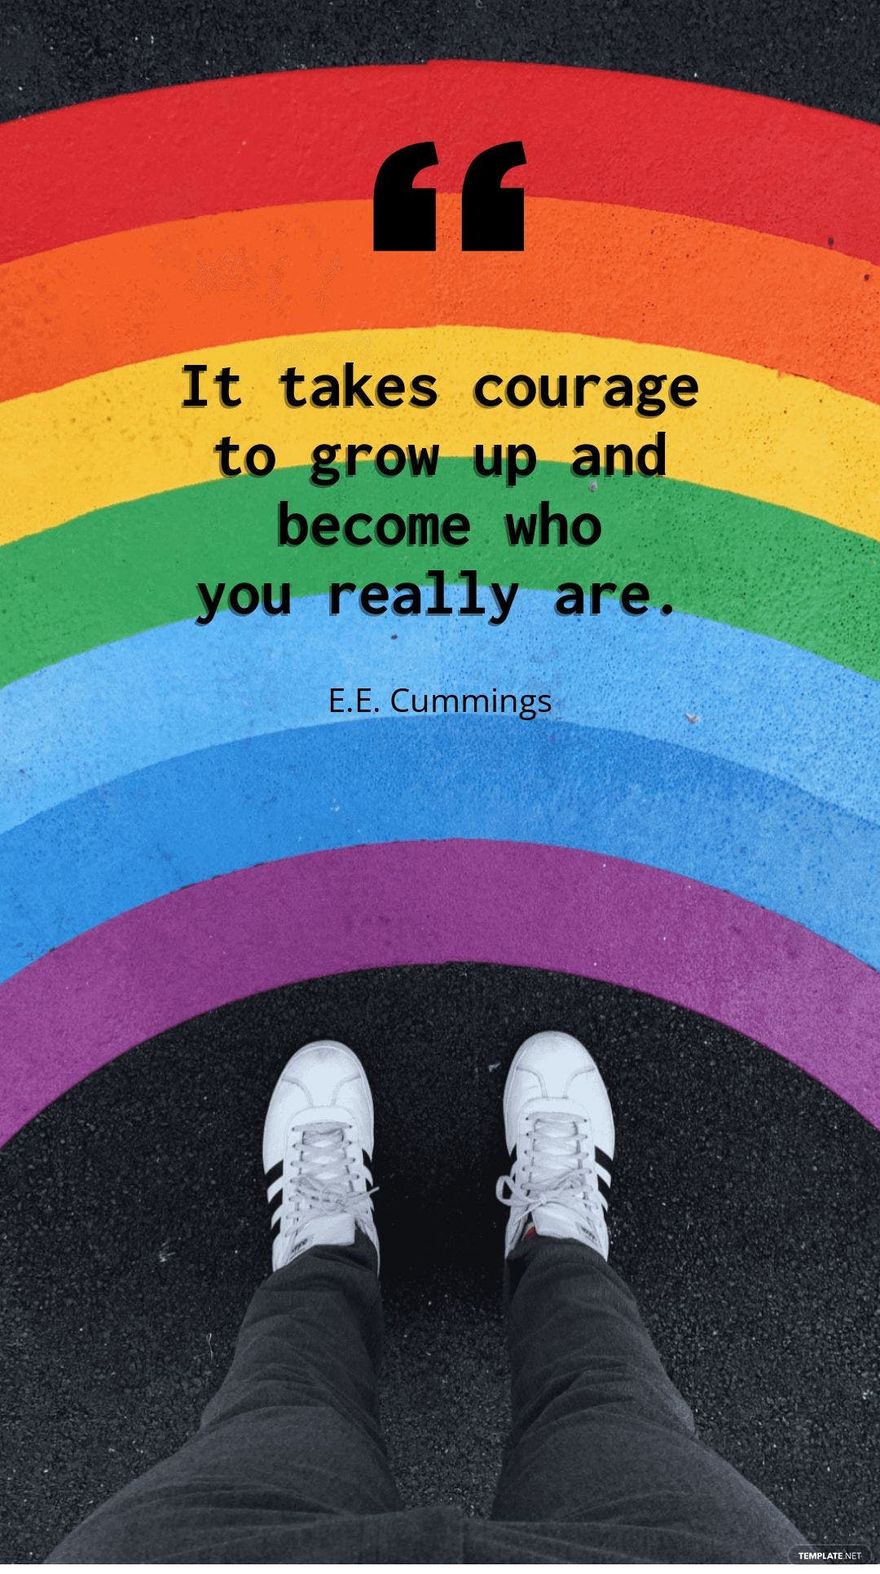 E.E. Cummings - It takes courage to grow up and become who you really are.